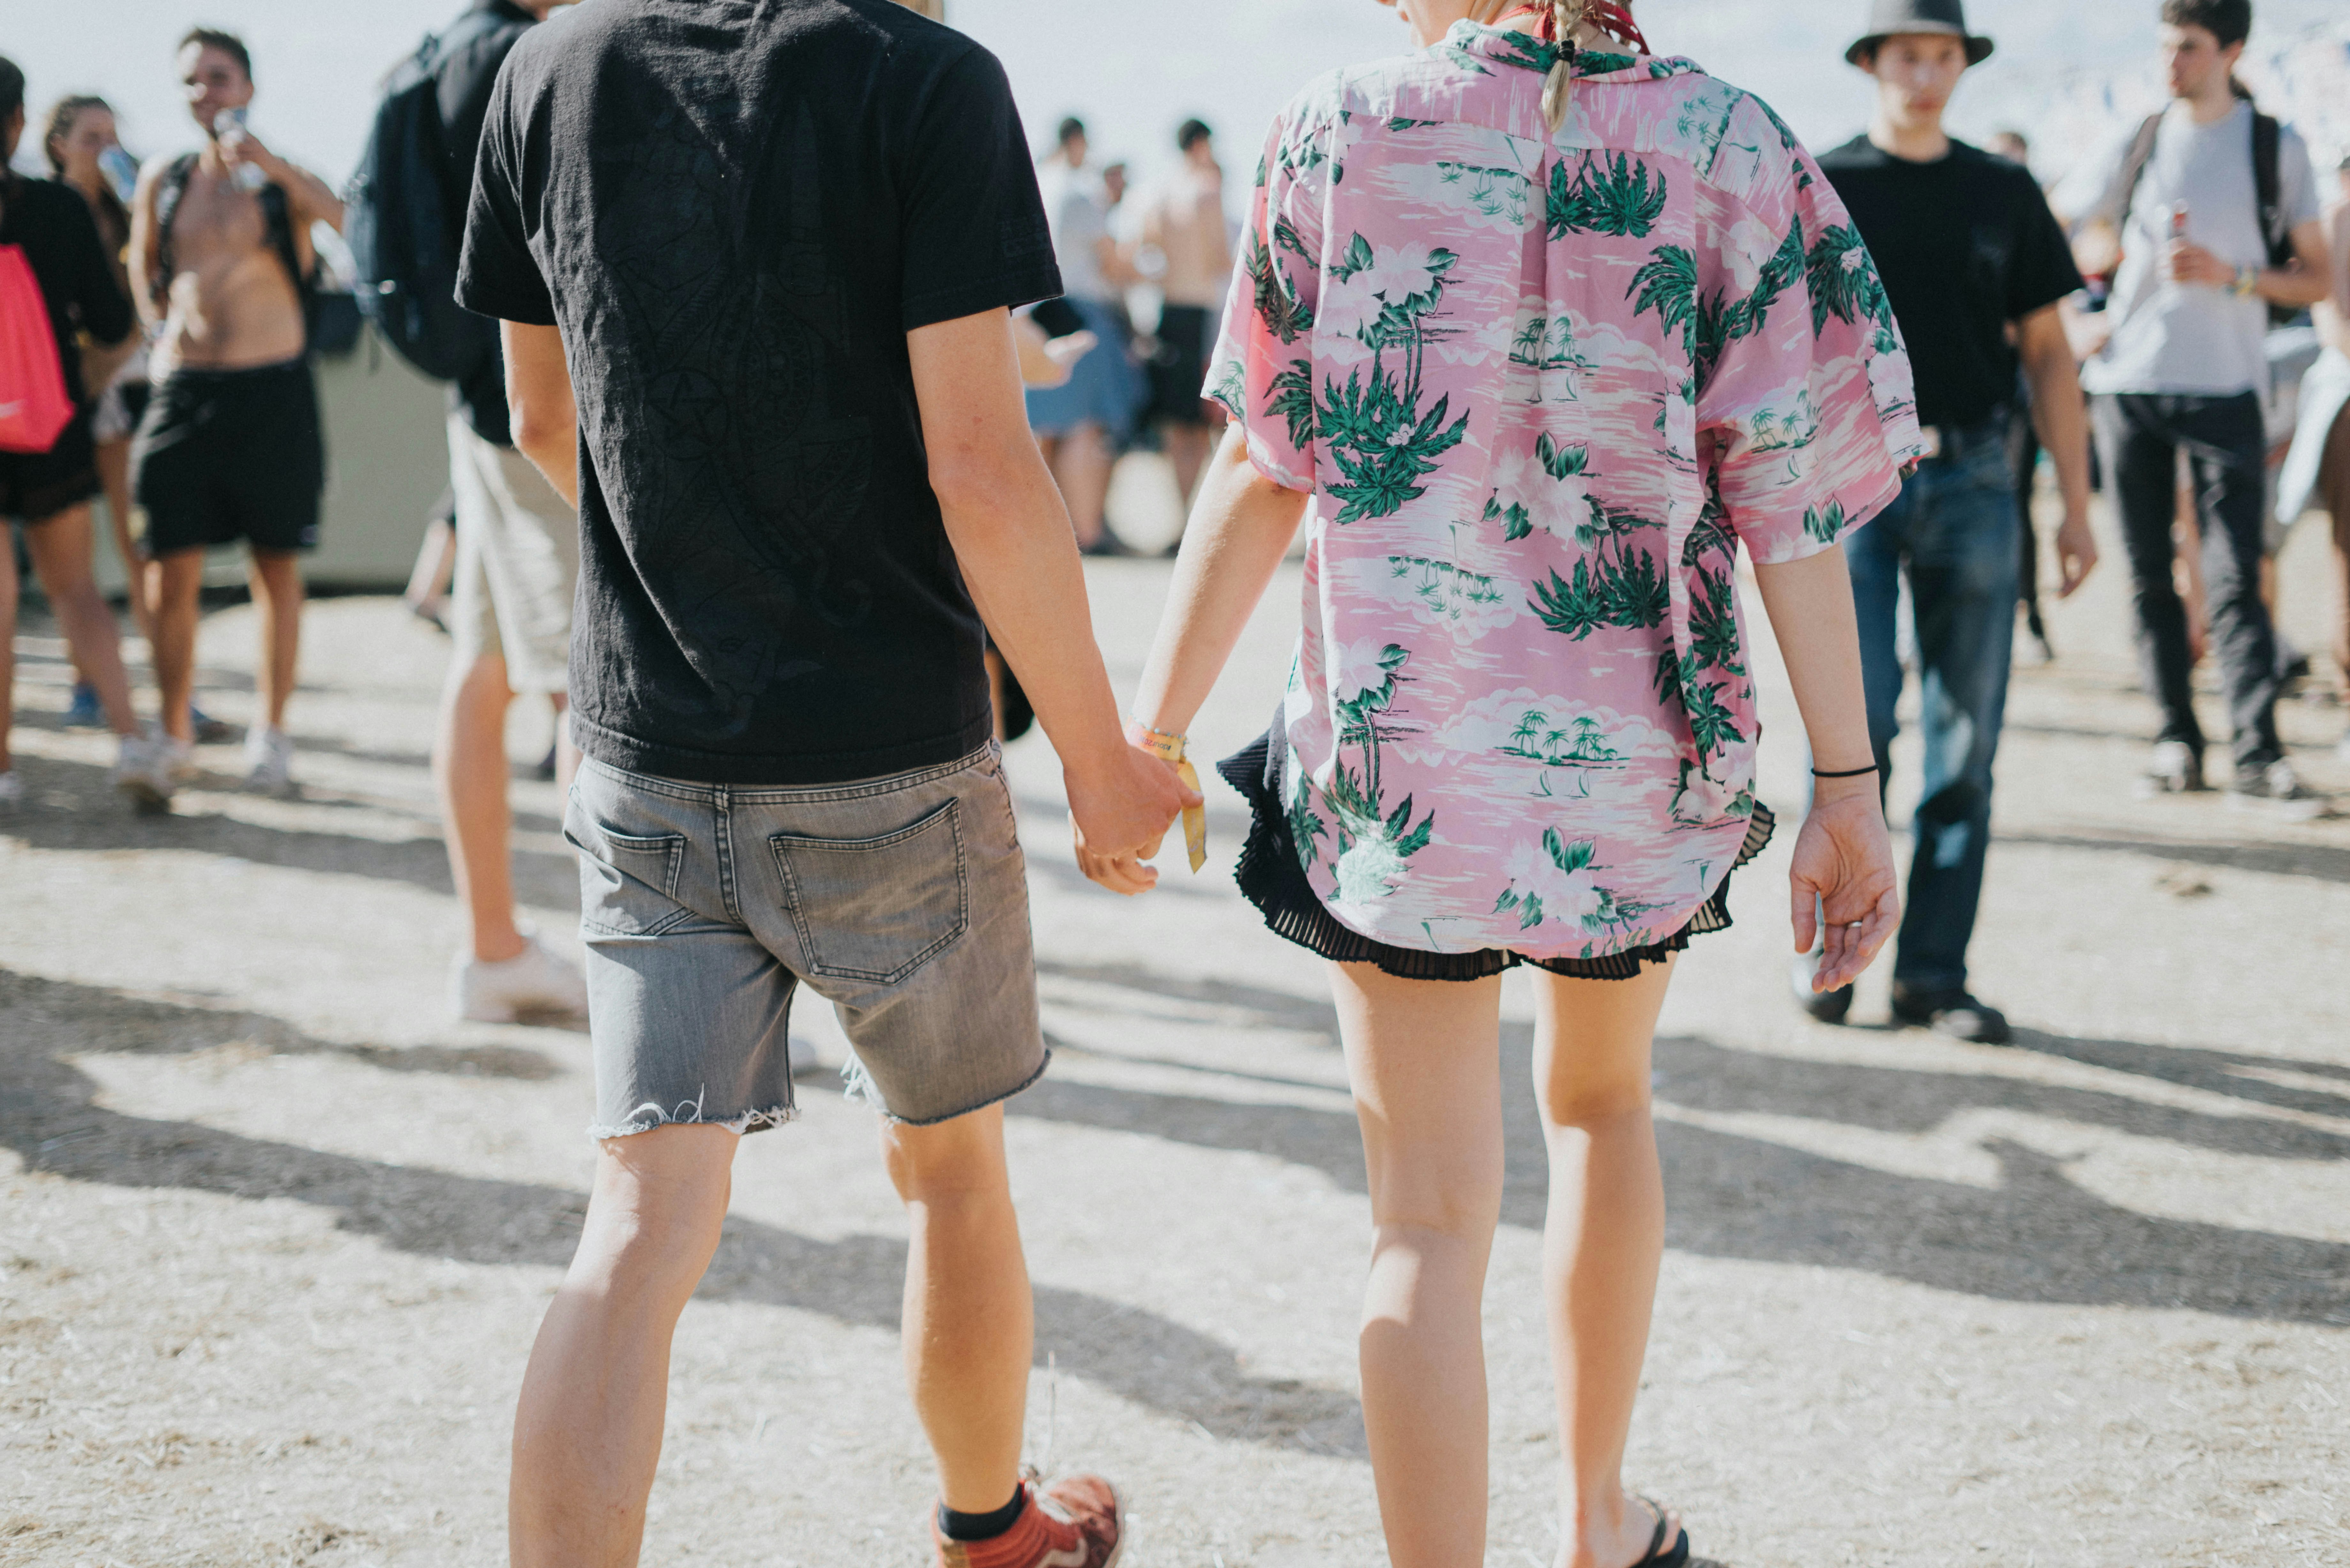 man and woman holding hands at middle of street